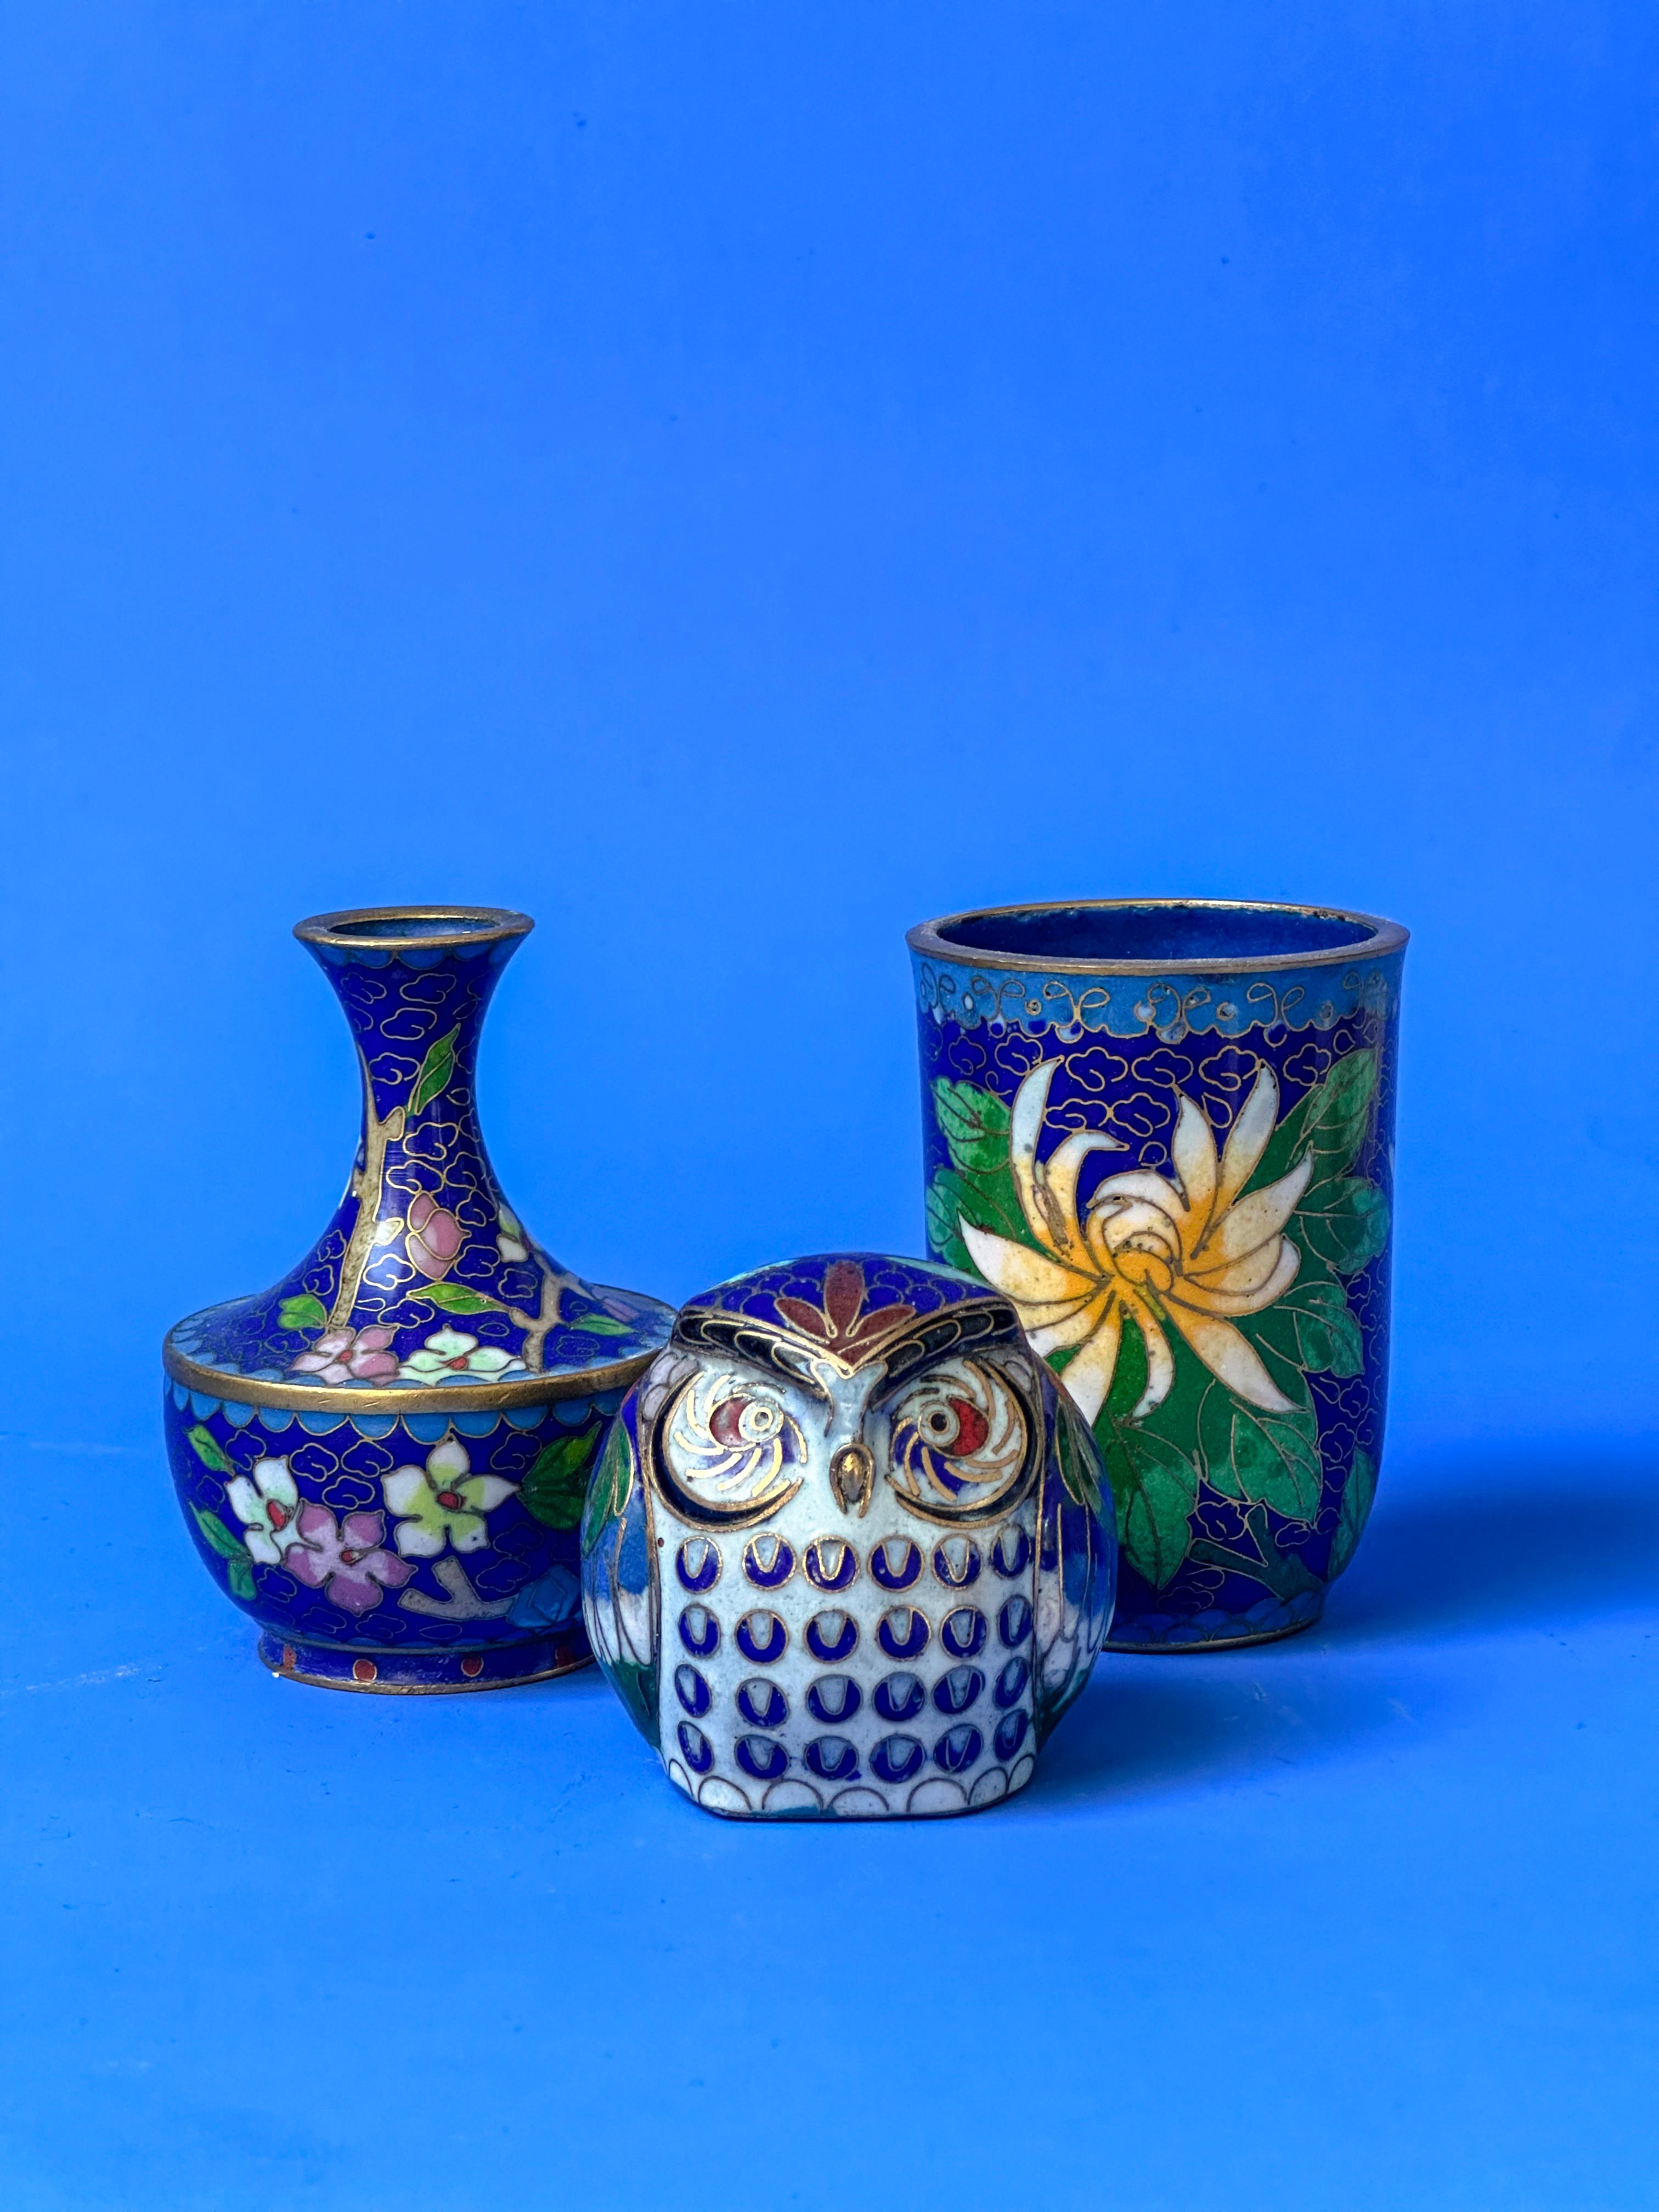 This vintage Chinese cloisonné collection features a trio of miniature blue ornaments, with each exuding its own unique charm and delicate design. The set includes a small vase, a small beaker, and a small owl ornament, all crafted from brass. These